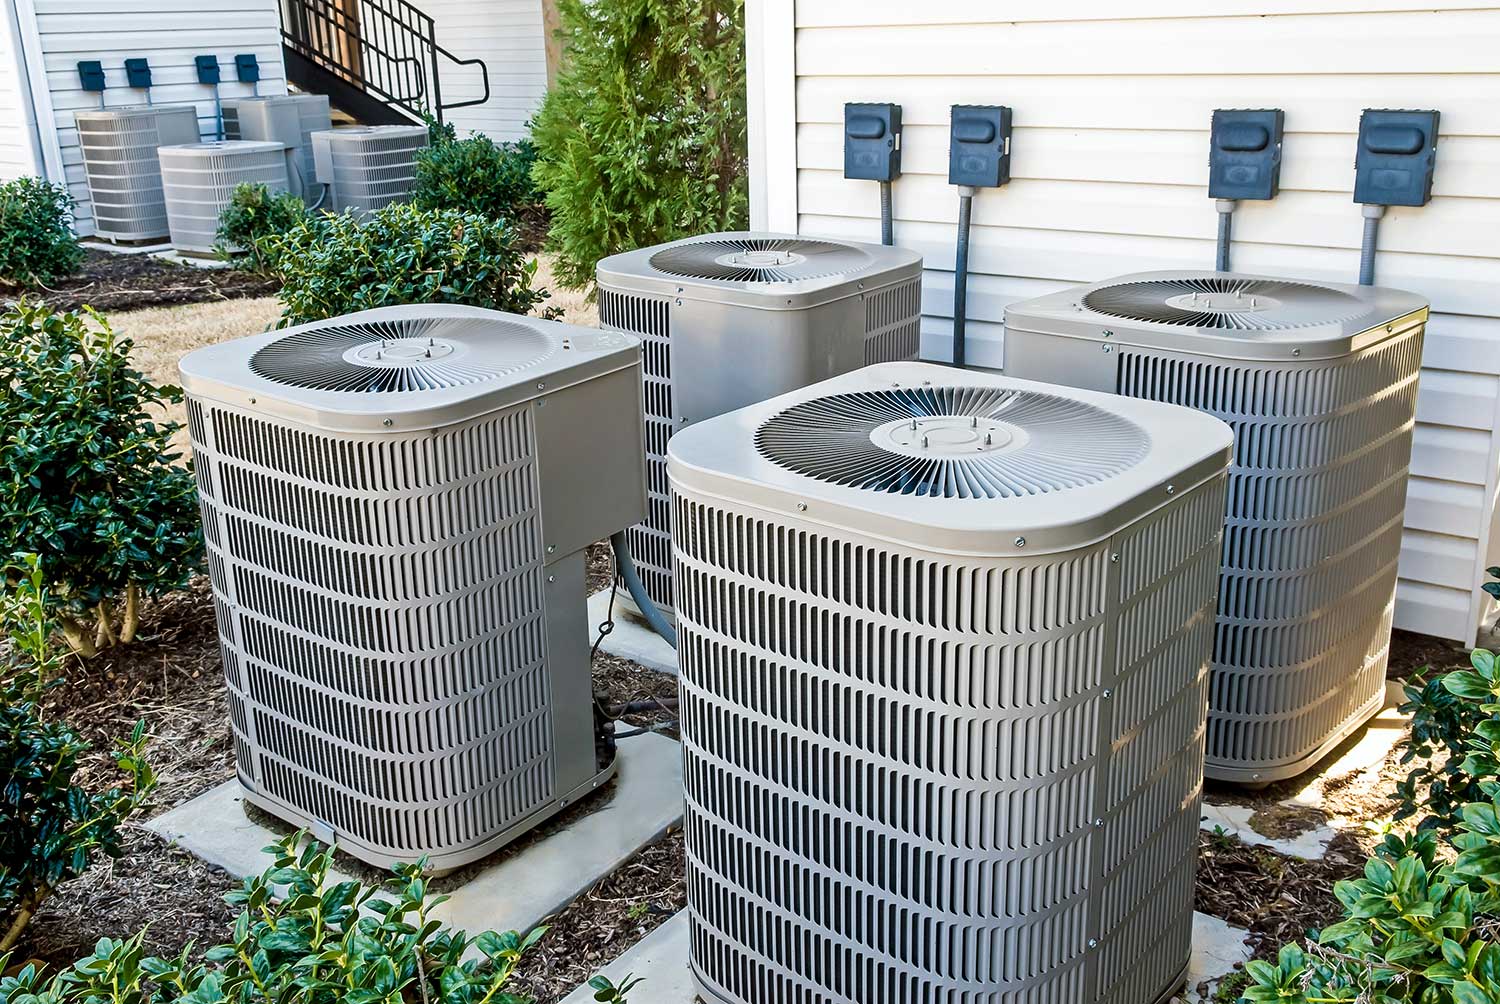 Air conditioning should not be costly in tepid as well as humid states